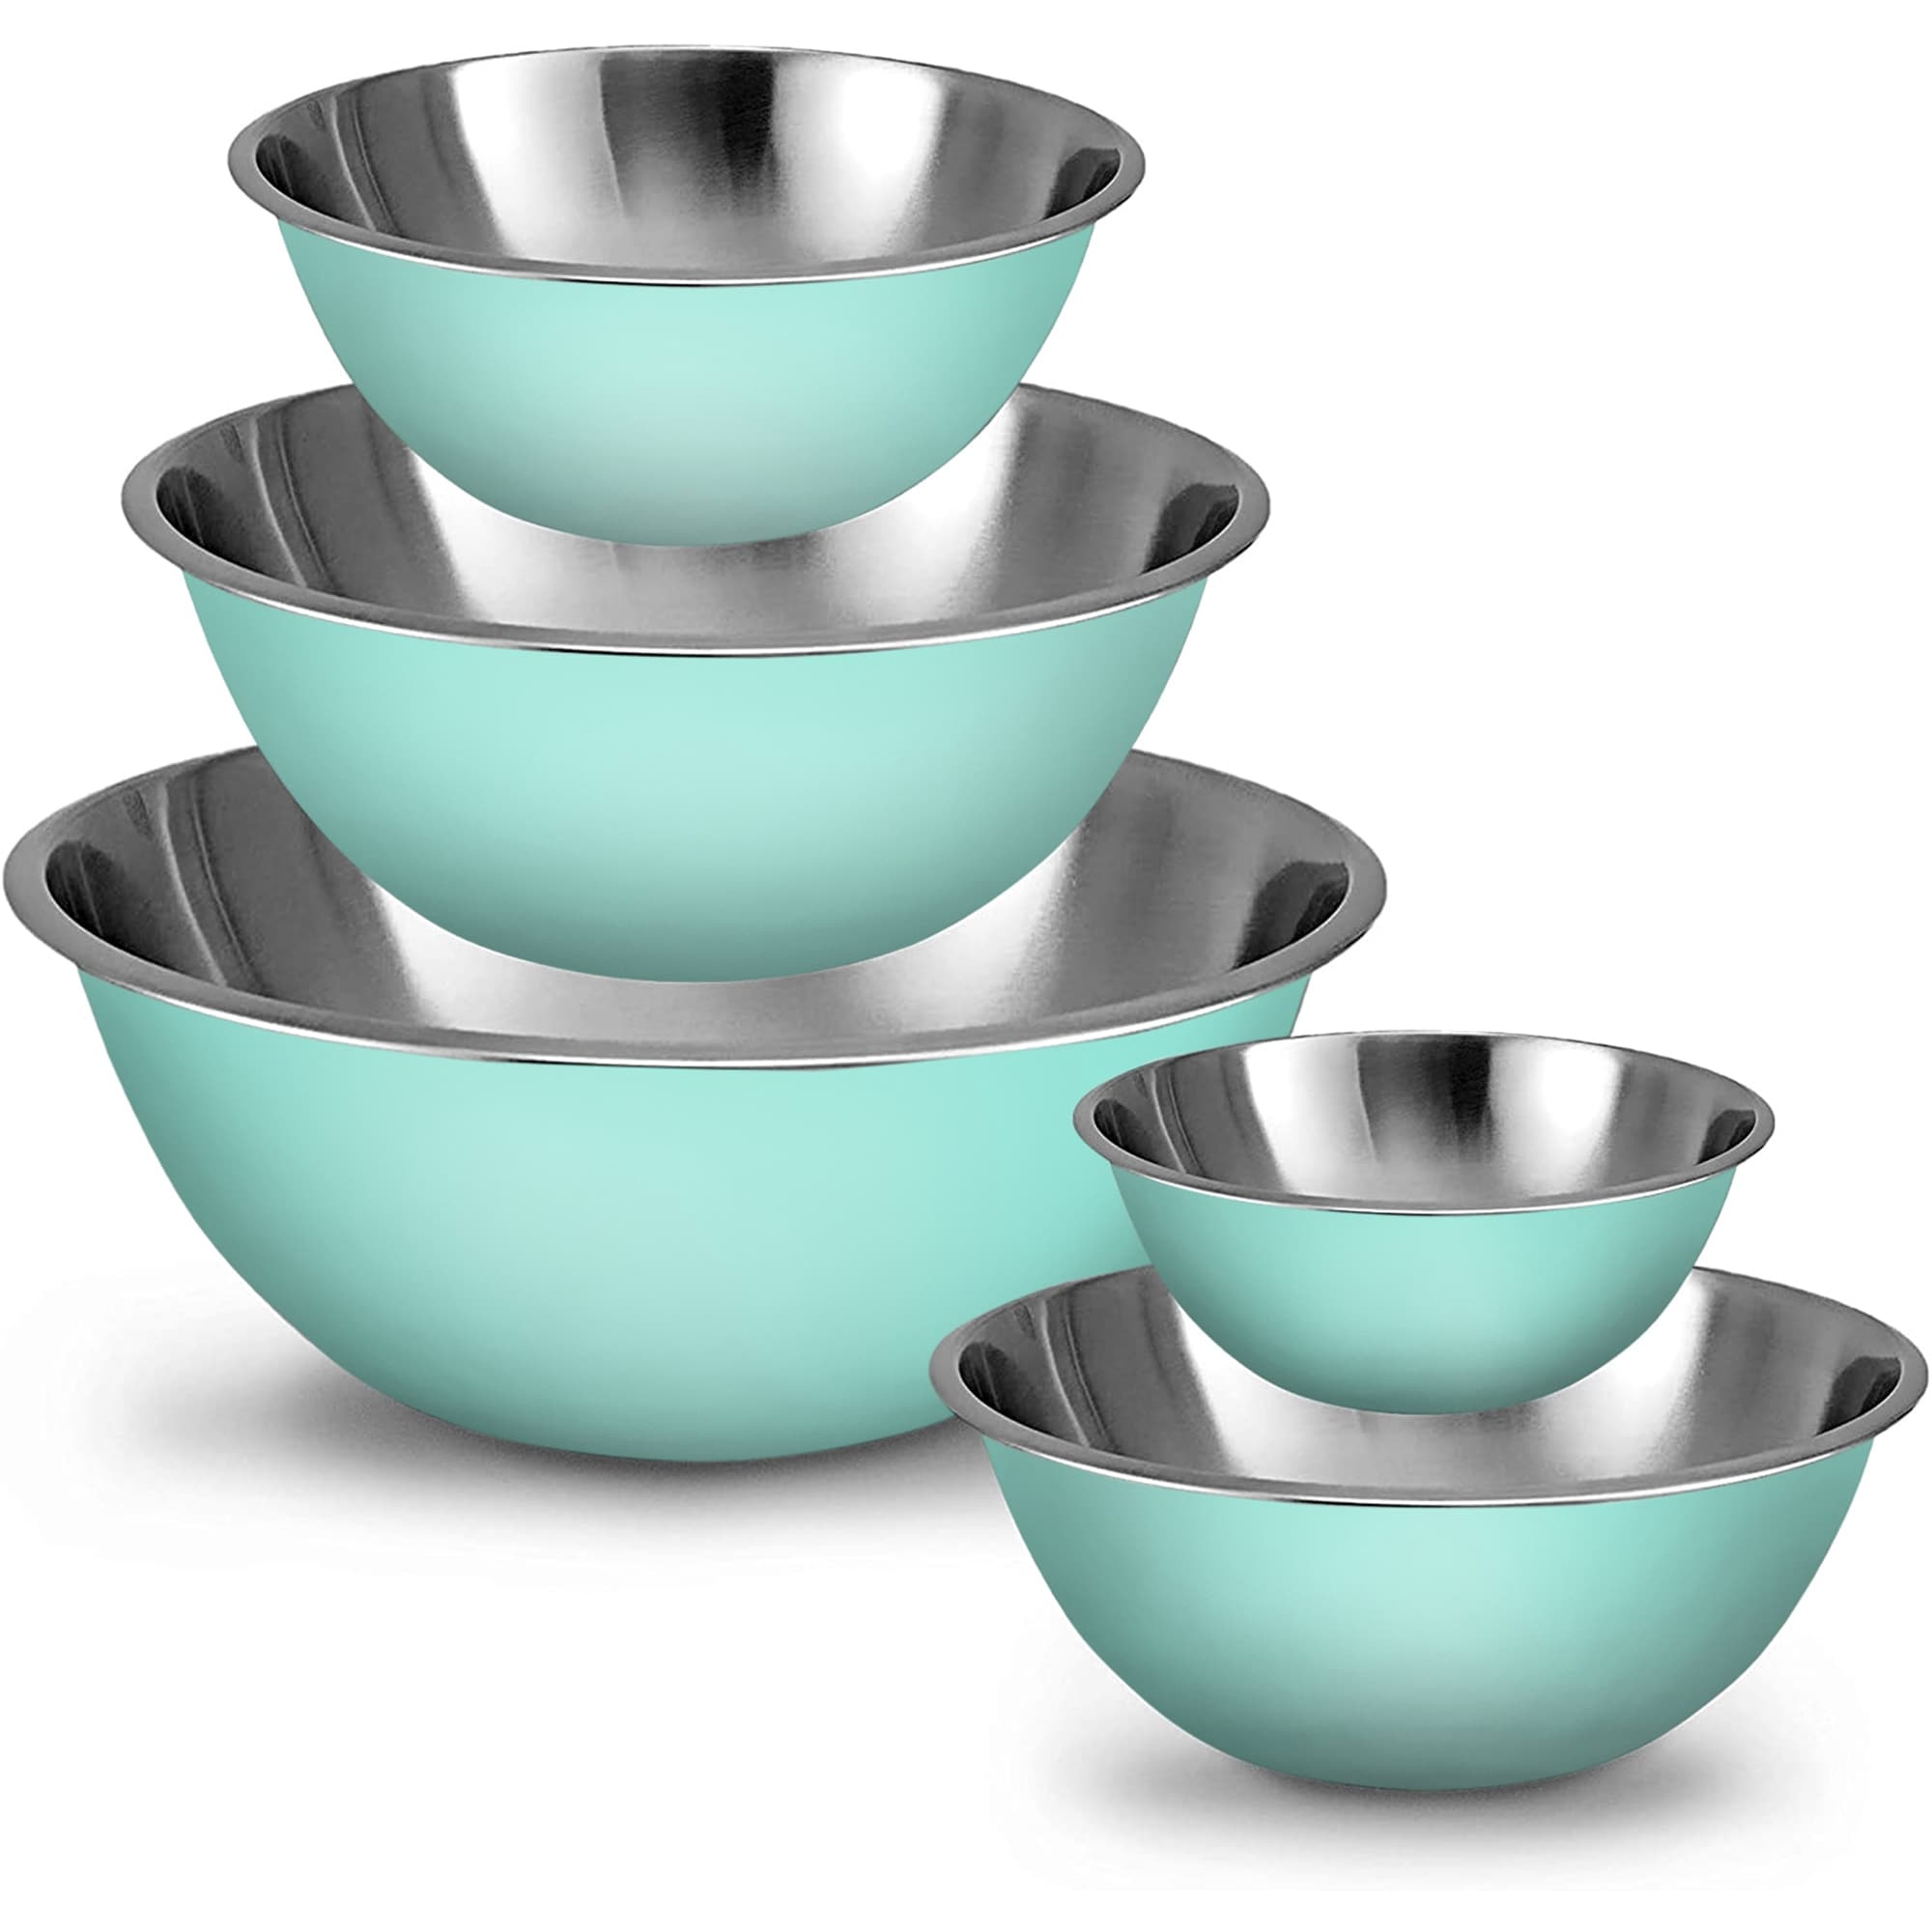 https://ak1.ostkcdn.com/images/products/is/images/direct/f9deaf823df237cc3e94d40912c647a4a079ee3a/Set-of-5-Meal-Prep-Stainless-Steel-Mixing-Bowls-Set---Blue.jpg